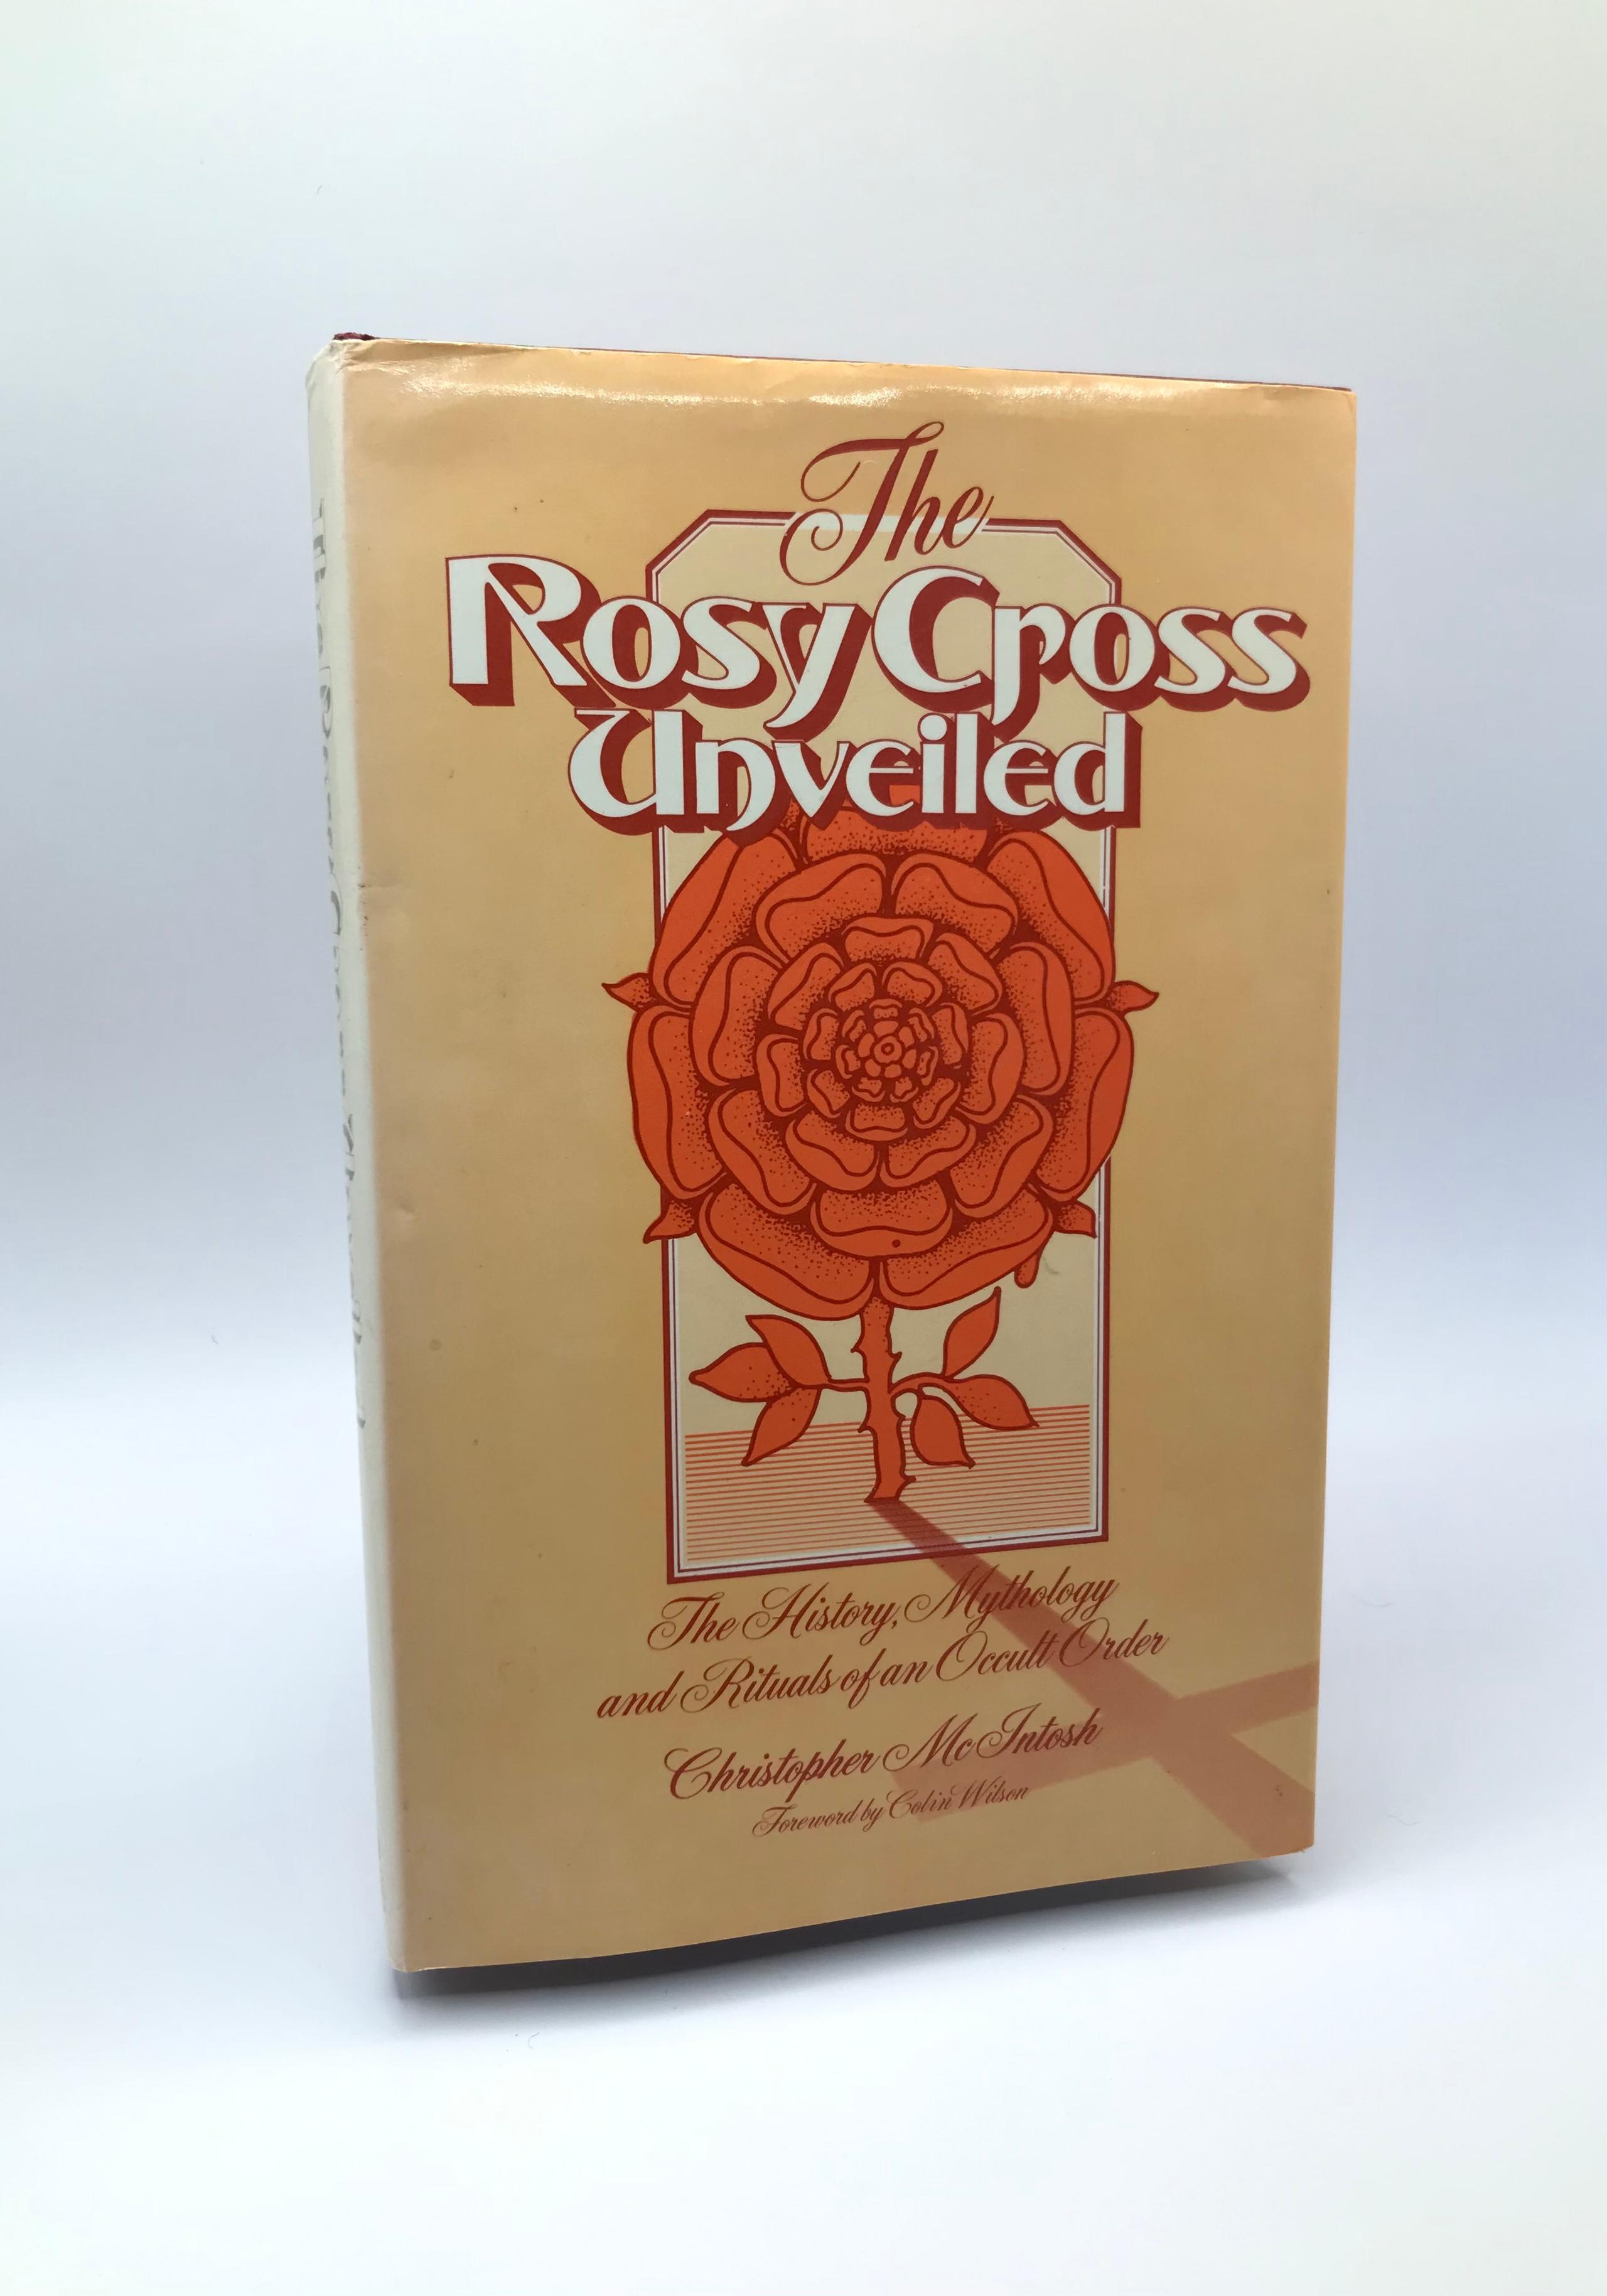 The Rosy Cross Unveiled by Christopher McItosh